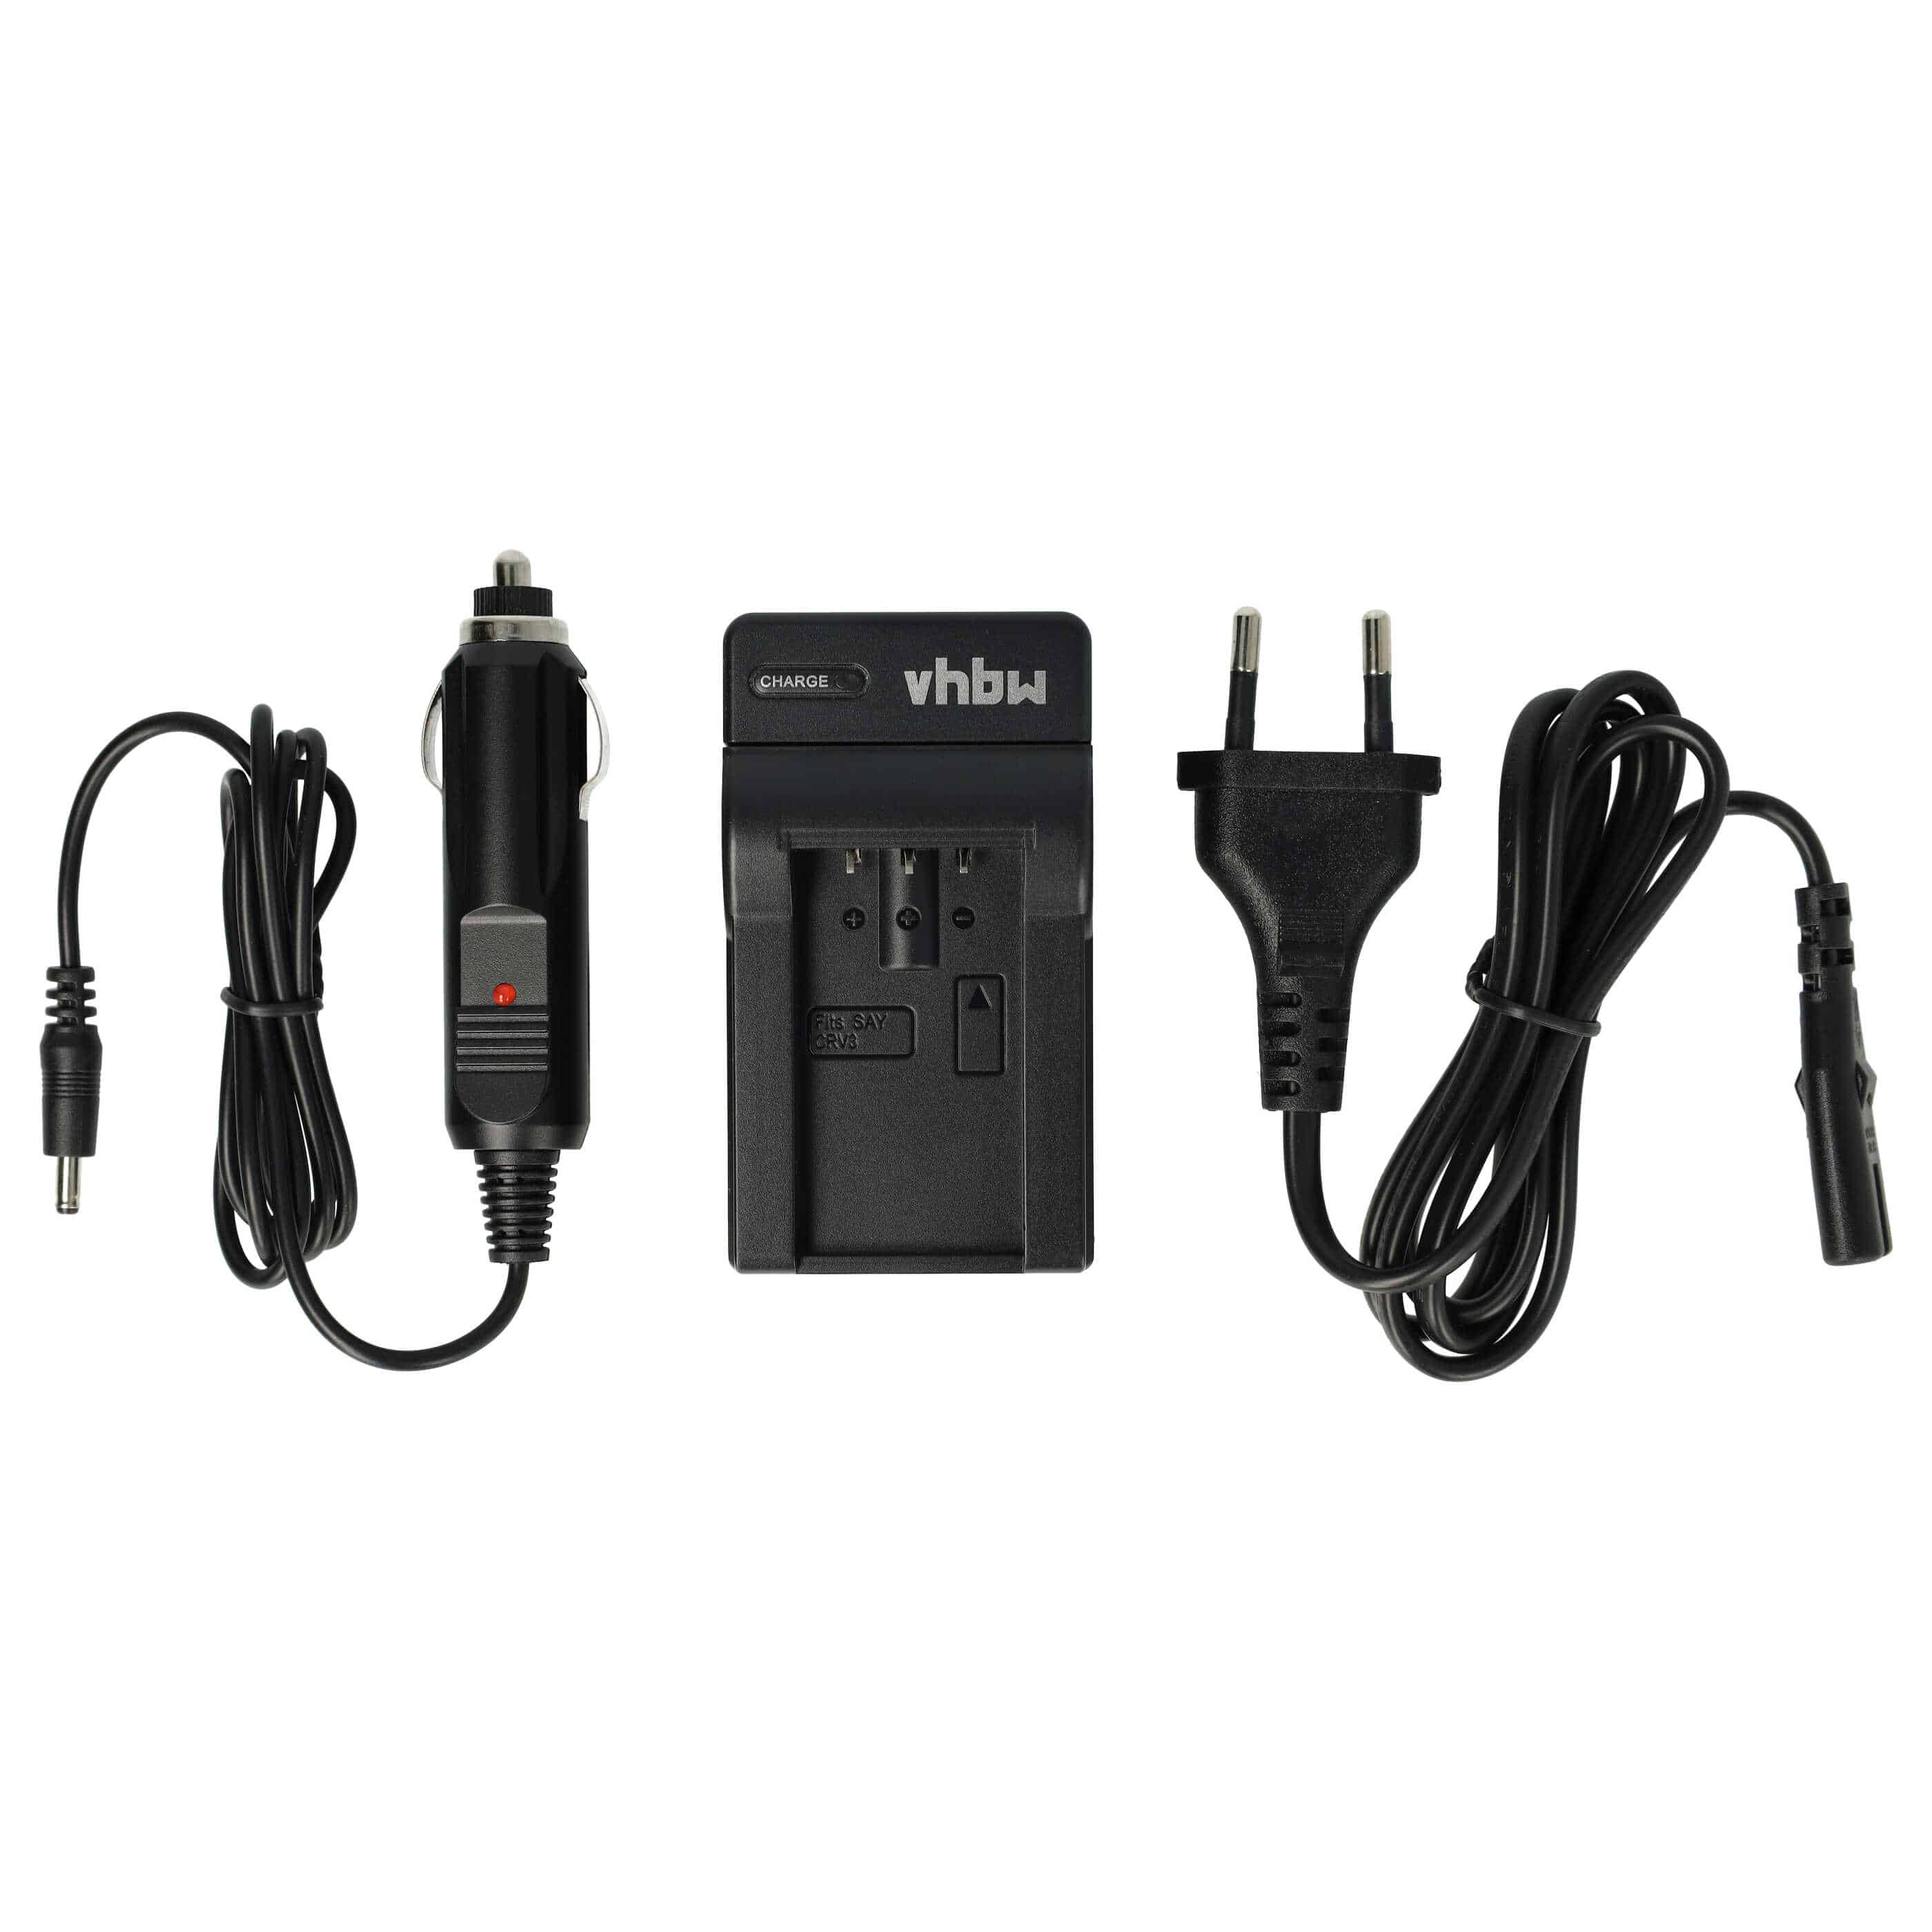 Battery Charger suitable for Toshiba Digital Camera - 0.6 A, 4.8 V